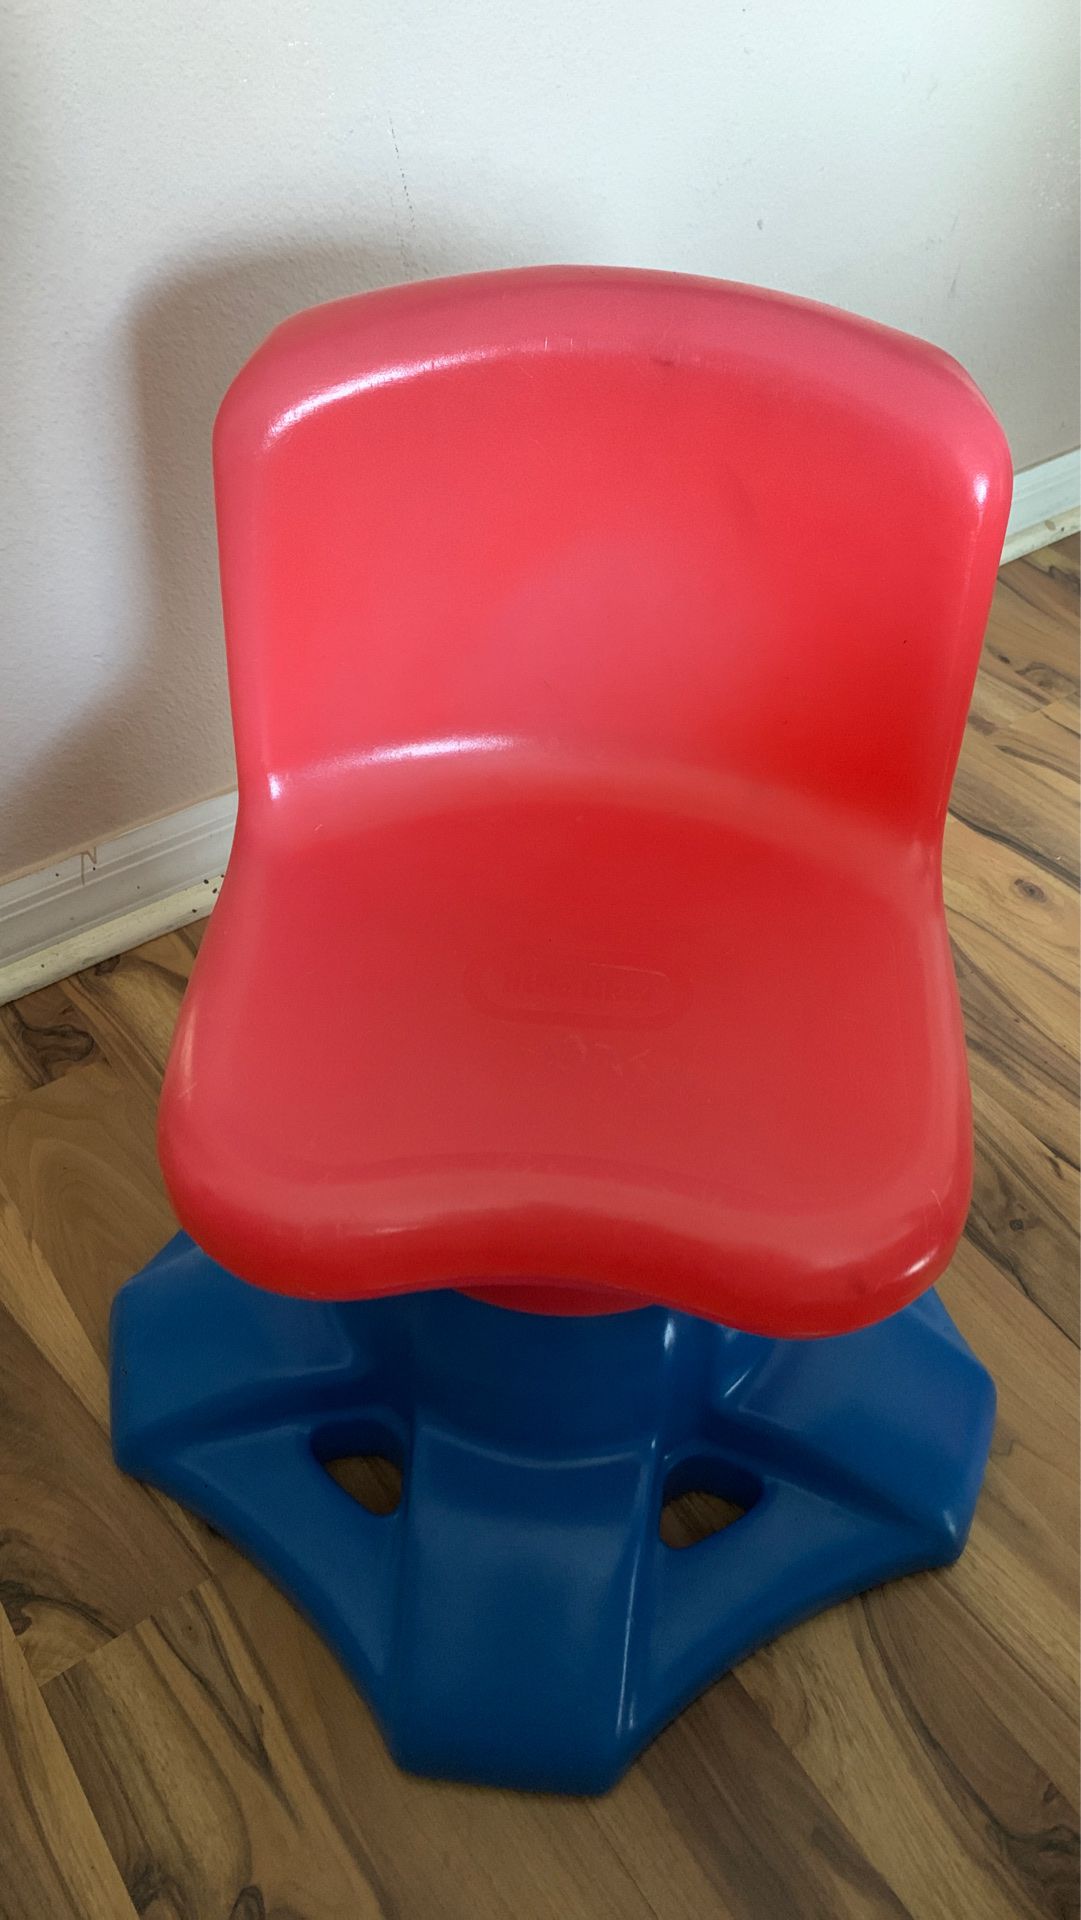 Little Tikes red and blue kids chair